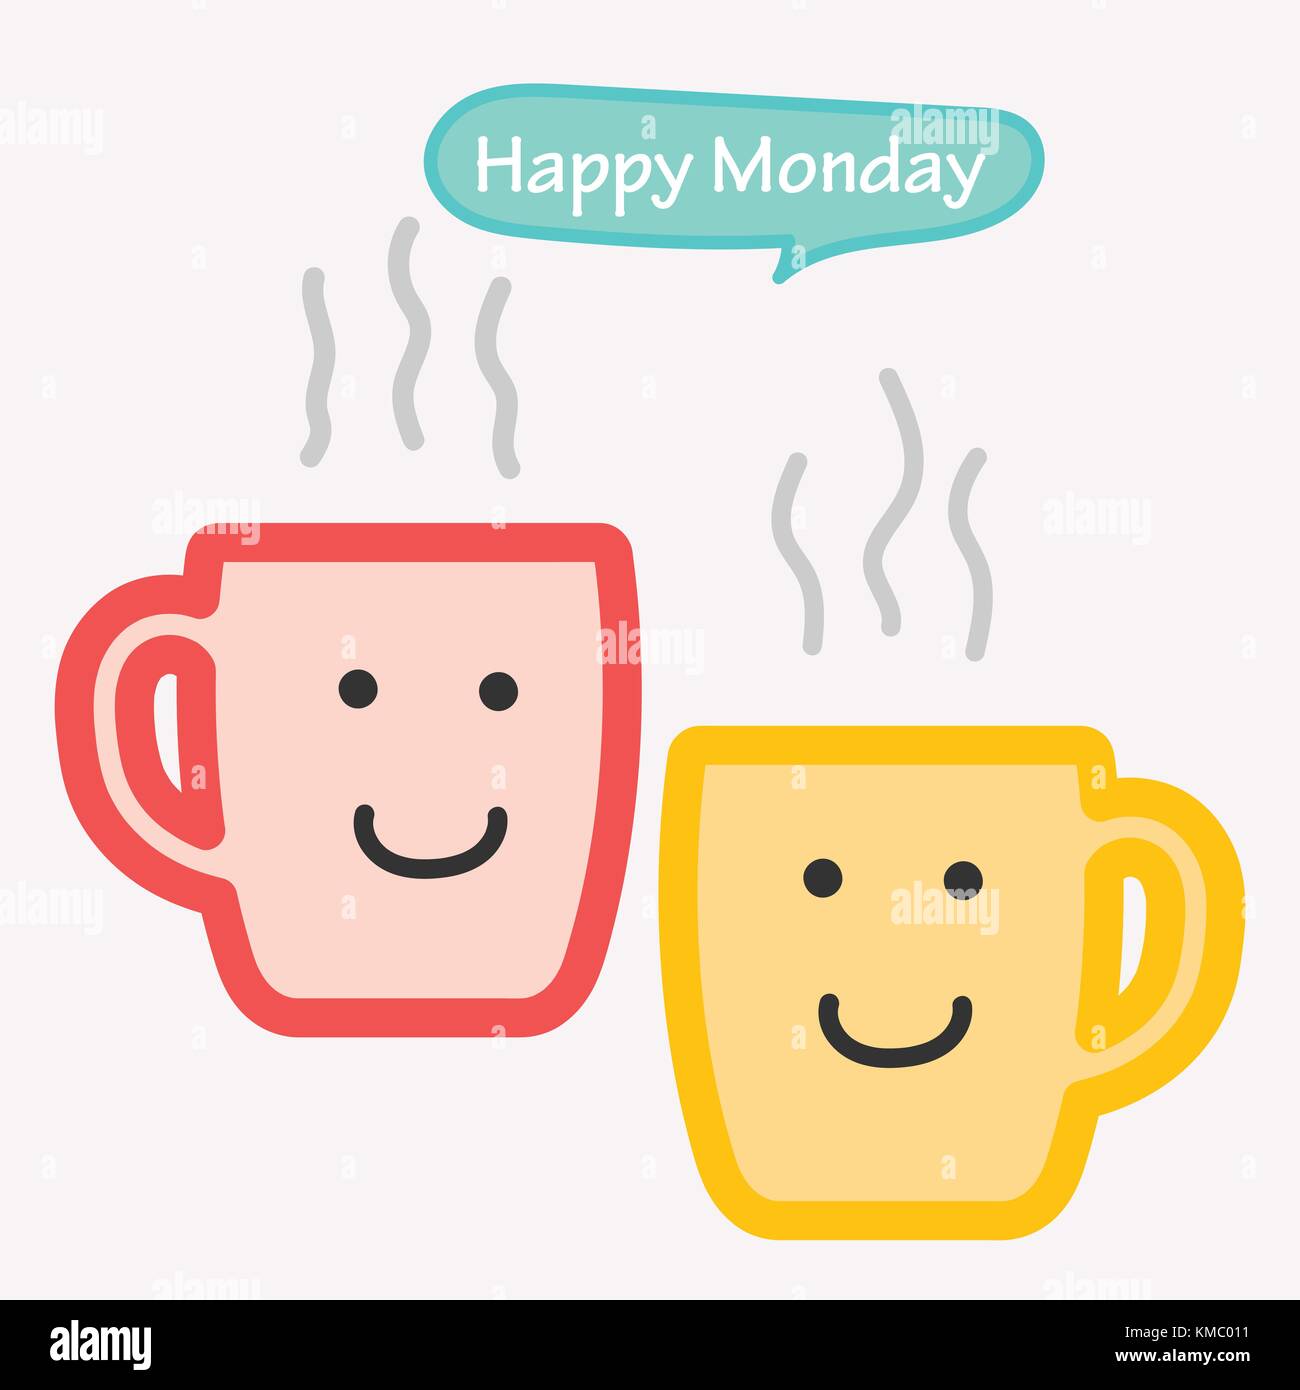 Happy Monday With Coffee Cup. Vector Illustration Stock Vector ...